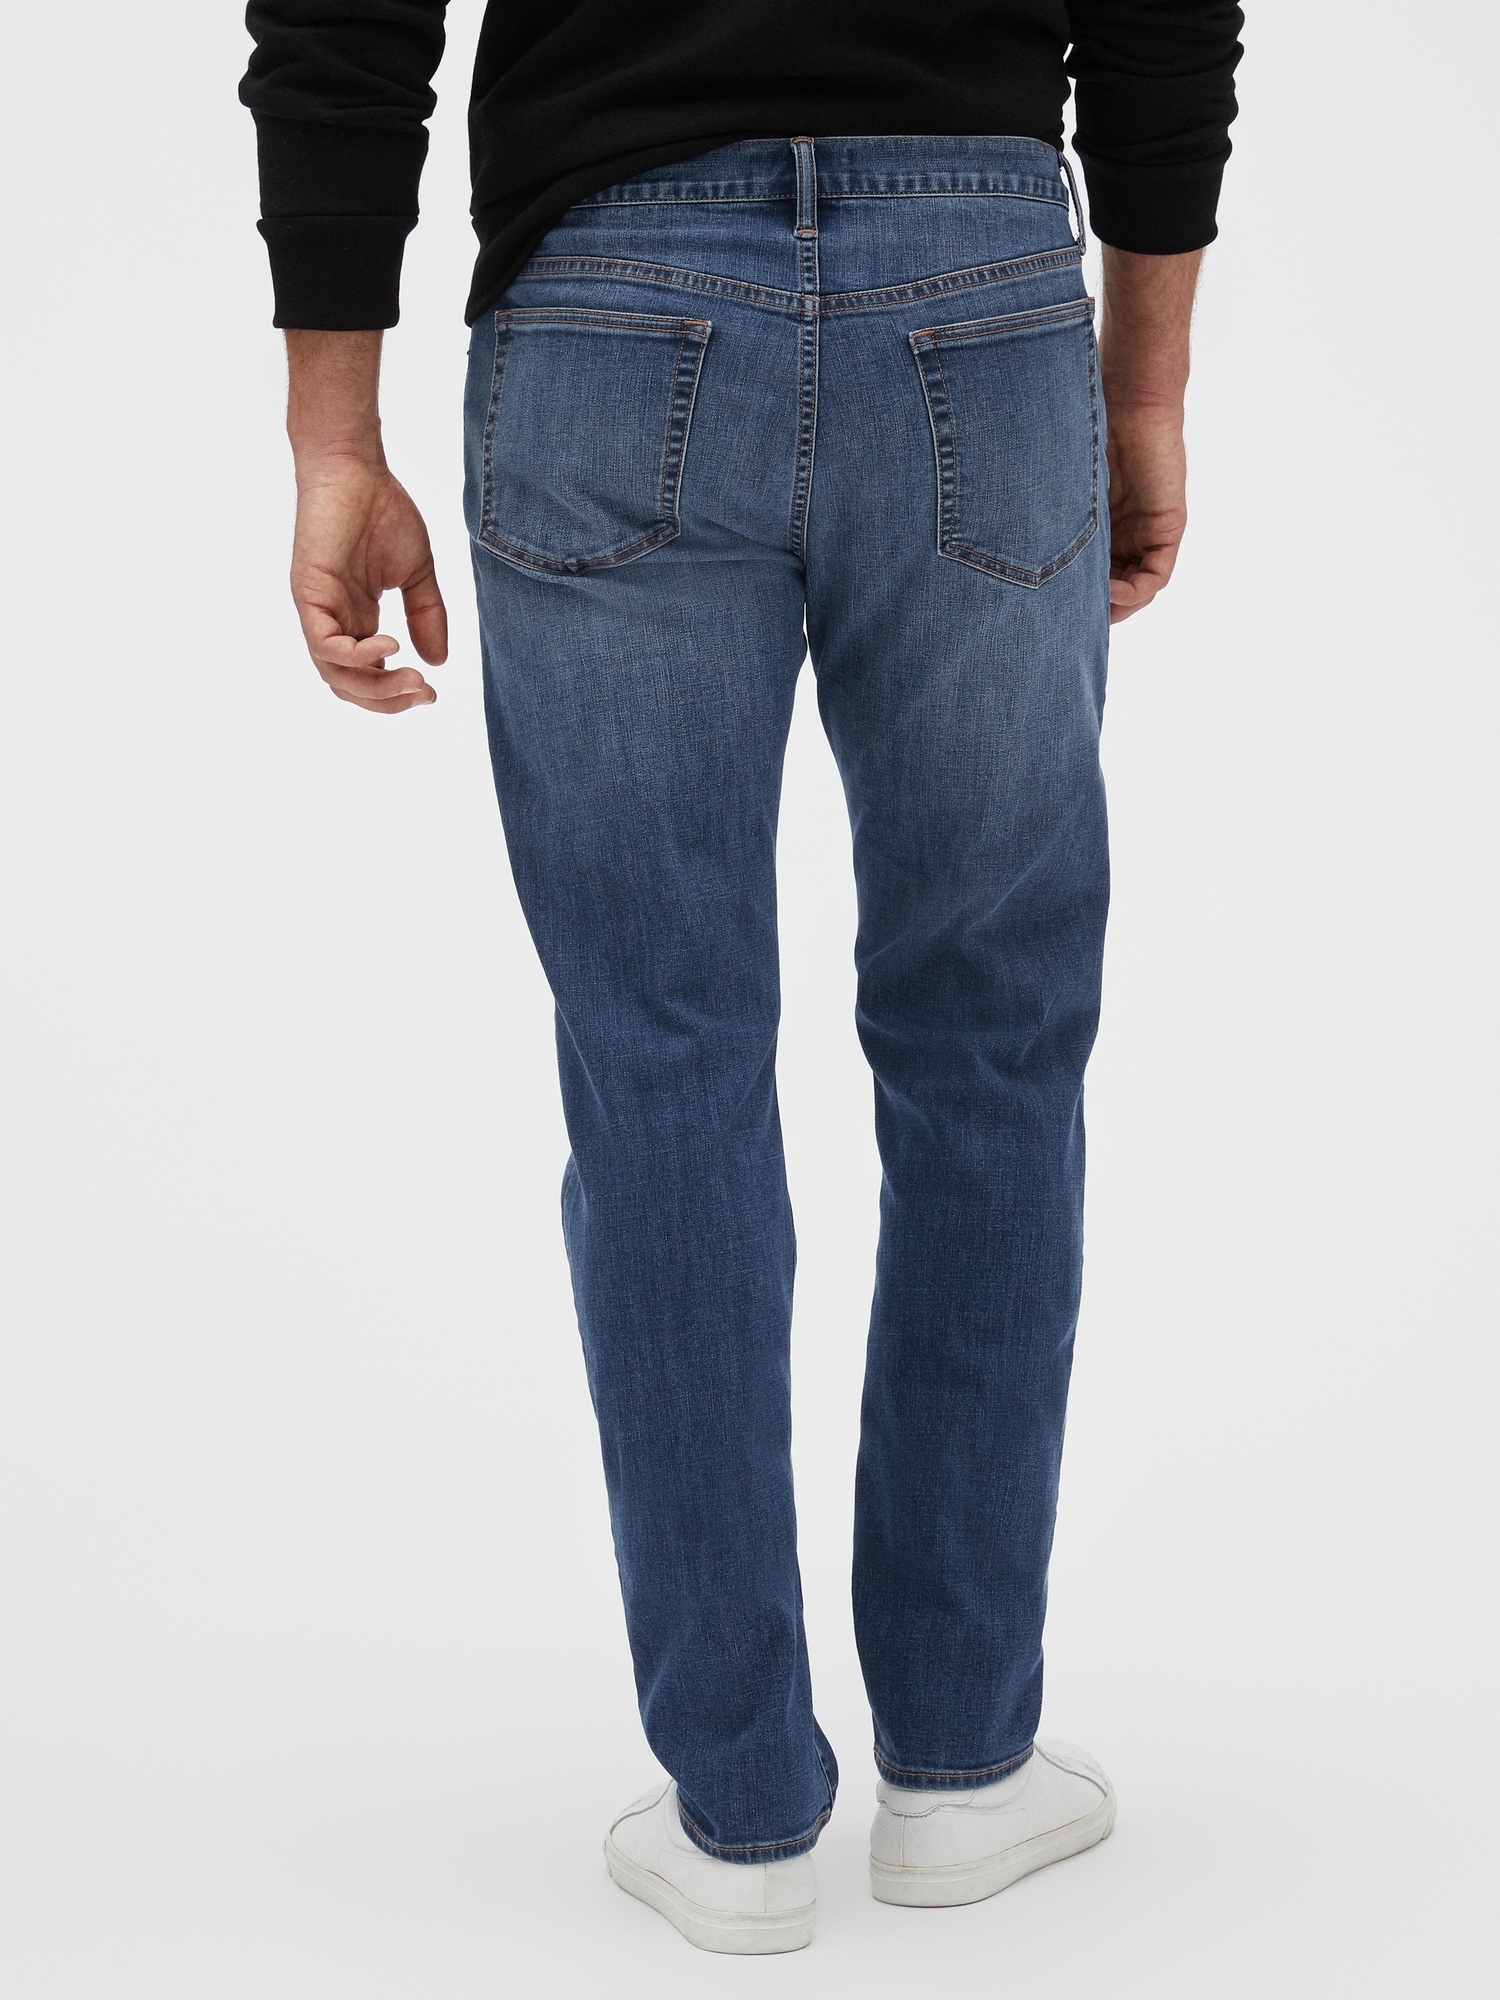 Soft Wear Slim Jeans With Washwell | Gap Factory